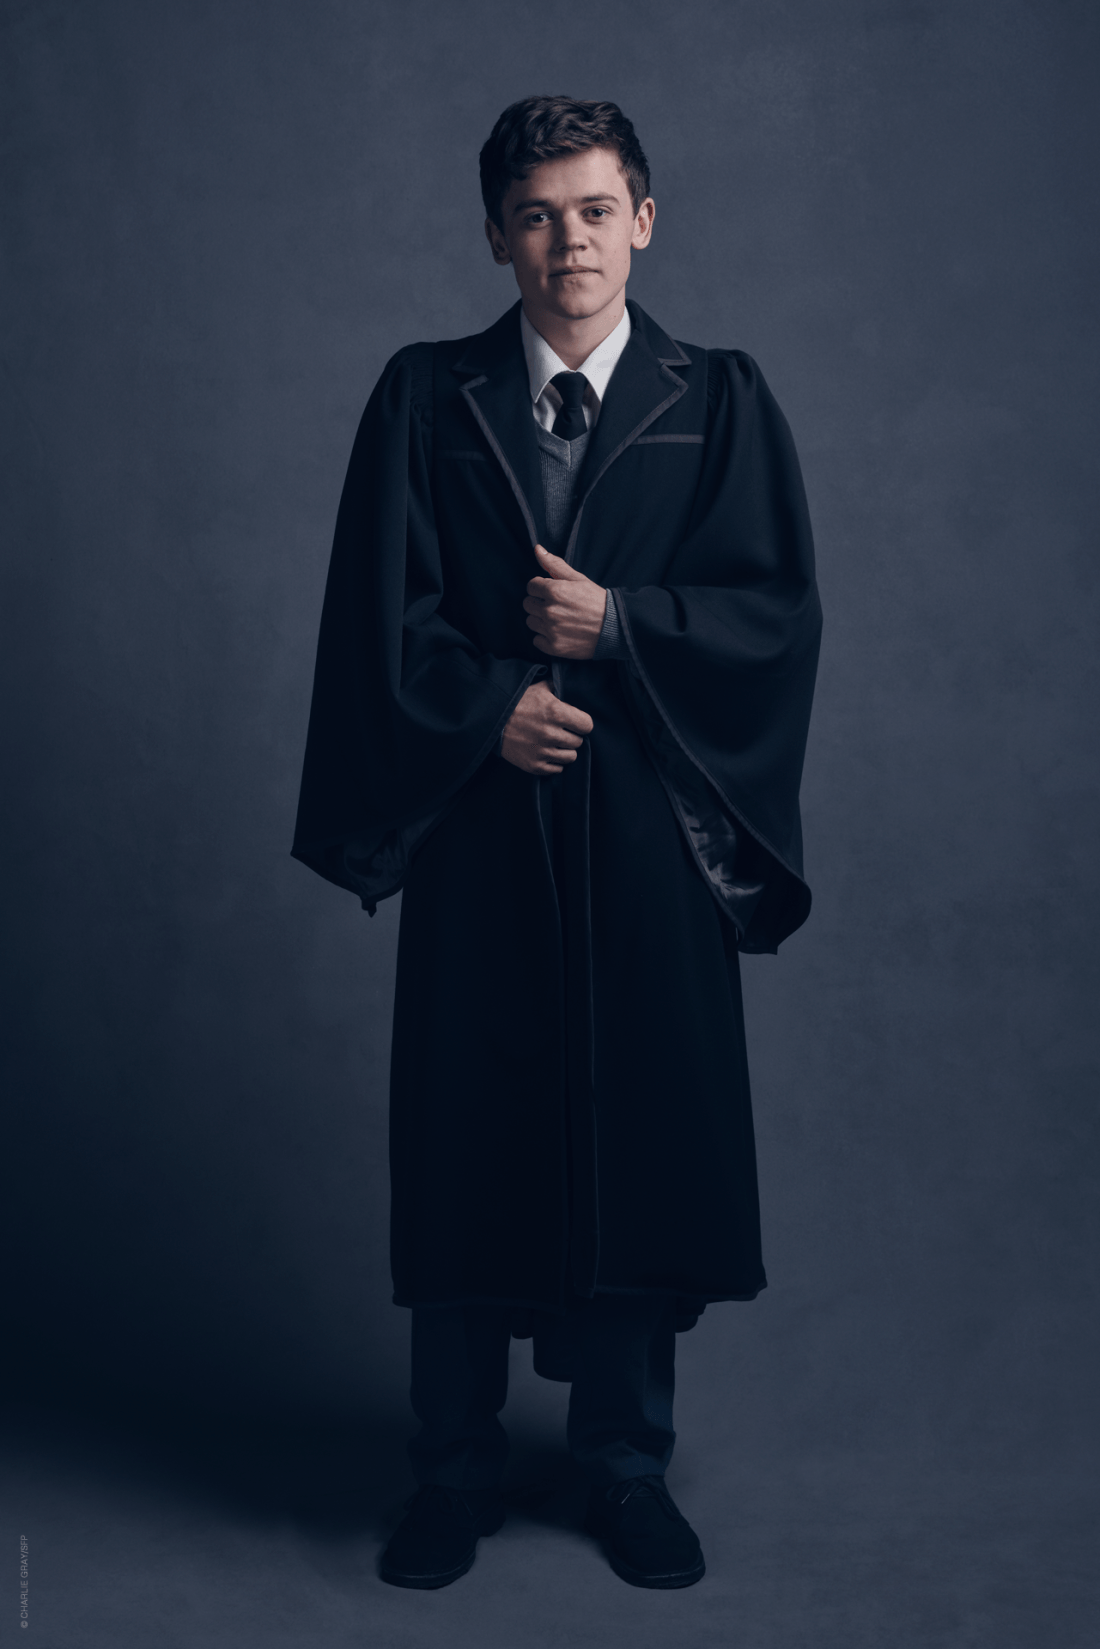 Photo by Charlie Gray/SFP from Pottermore (pottermore.com) 